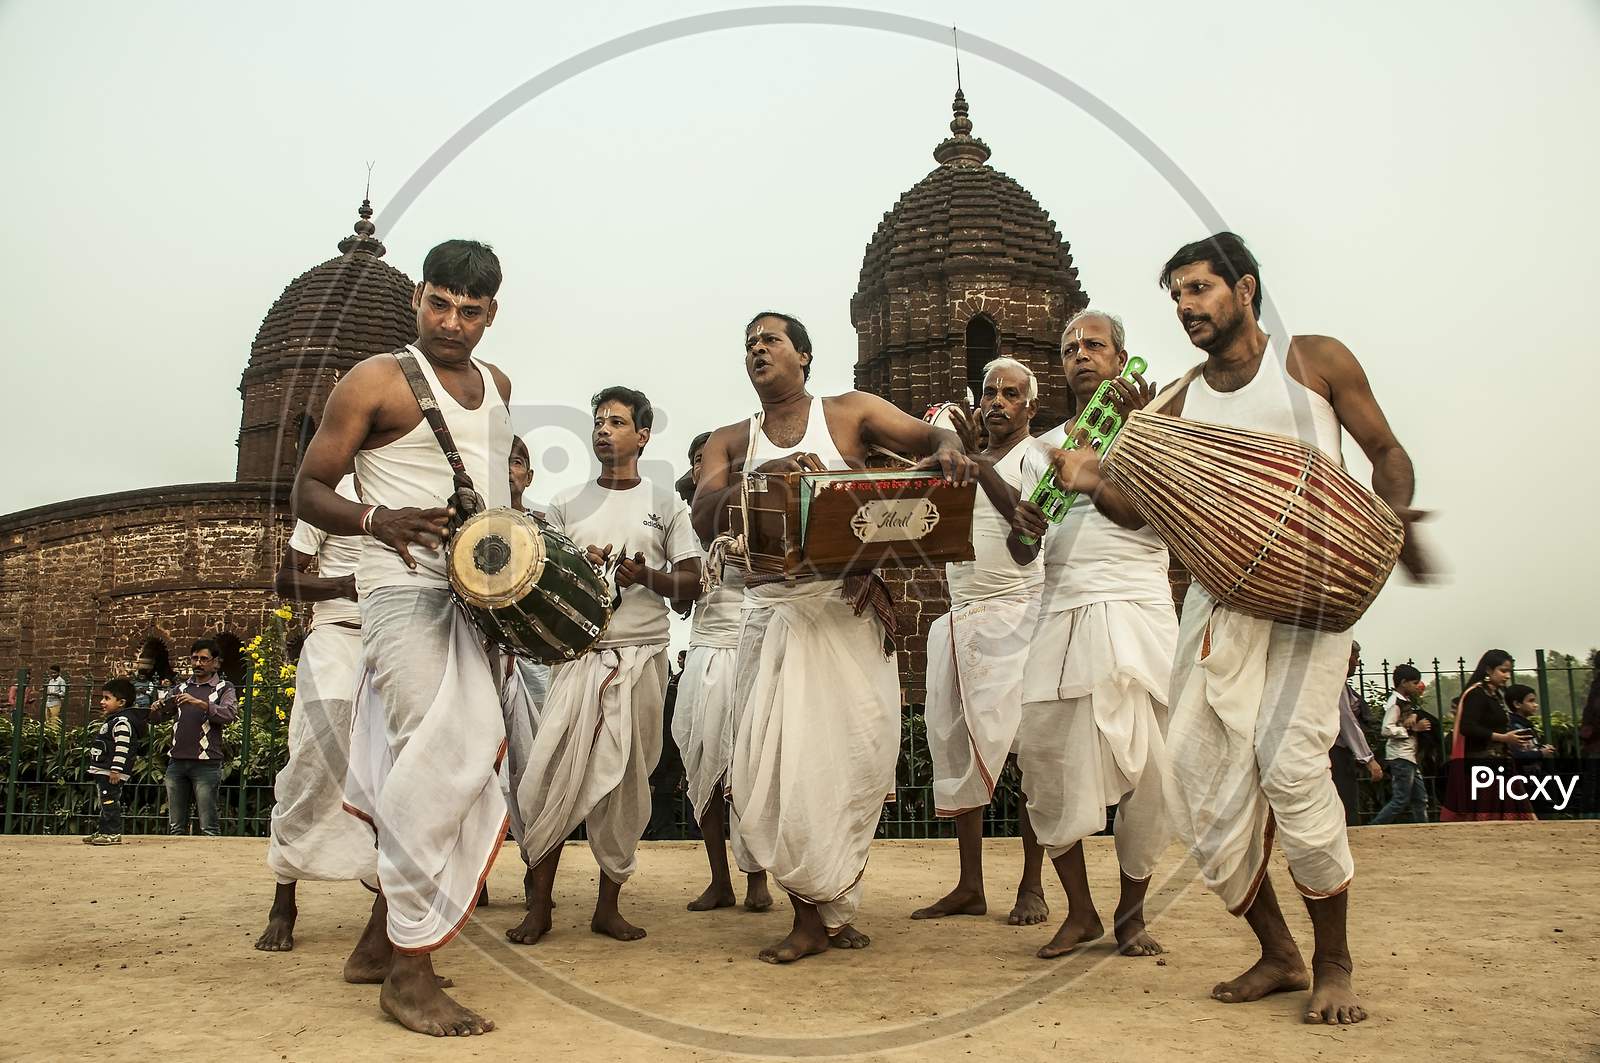 The folk singers of Bengal perform in front of a temple.